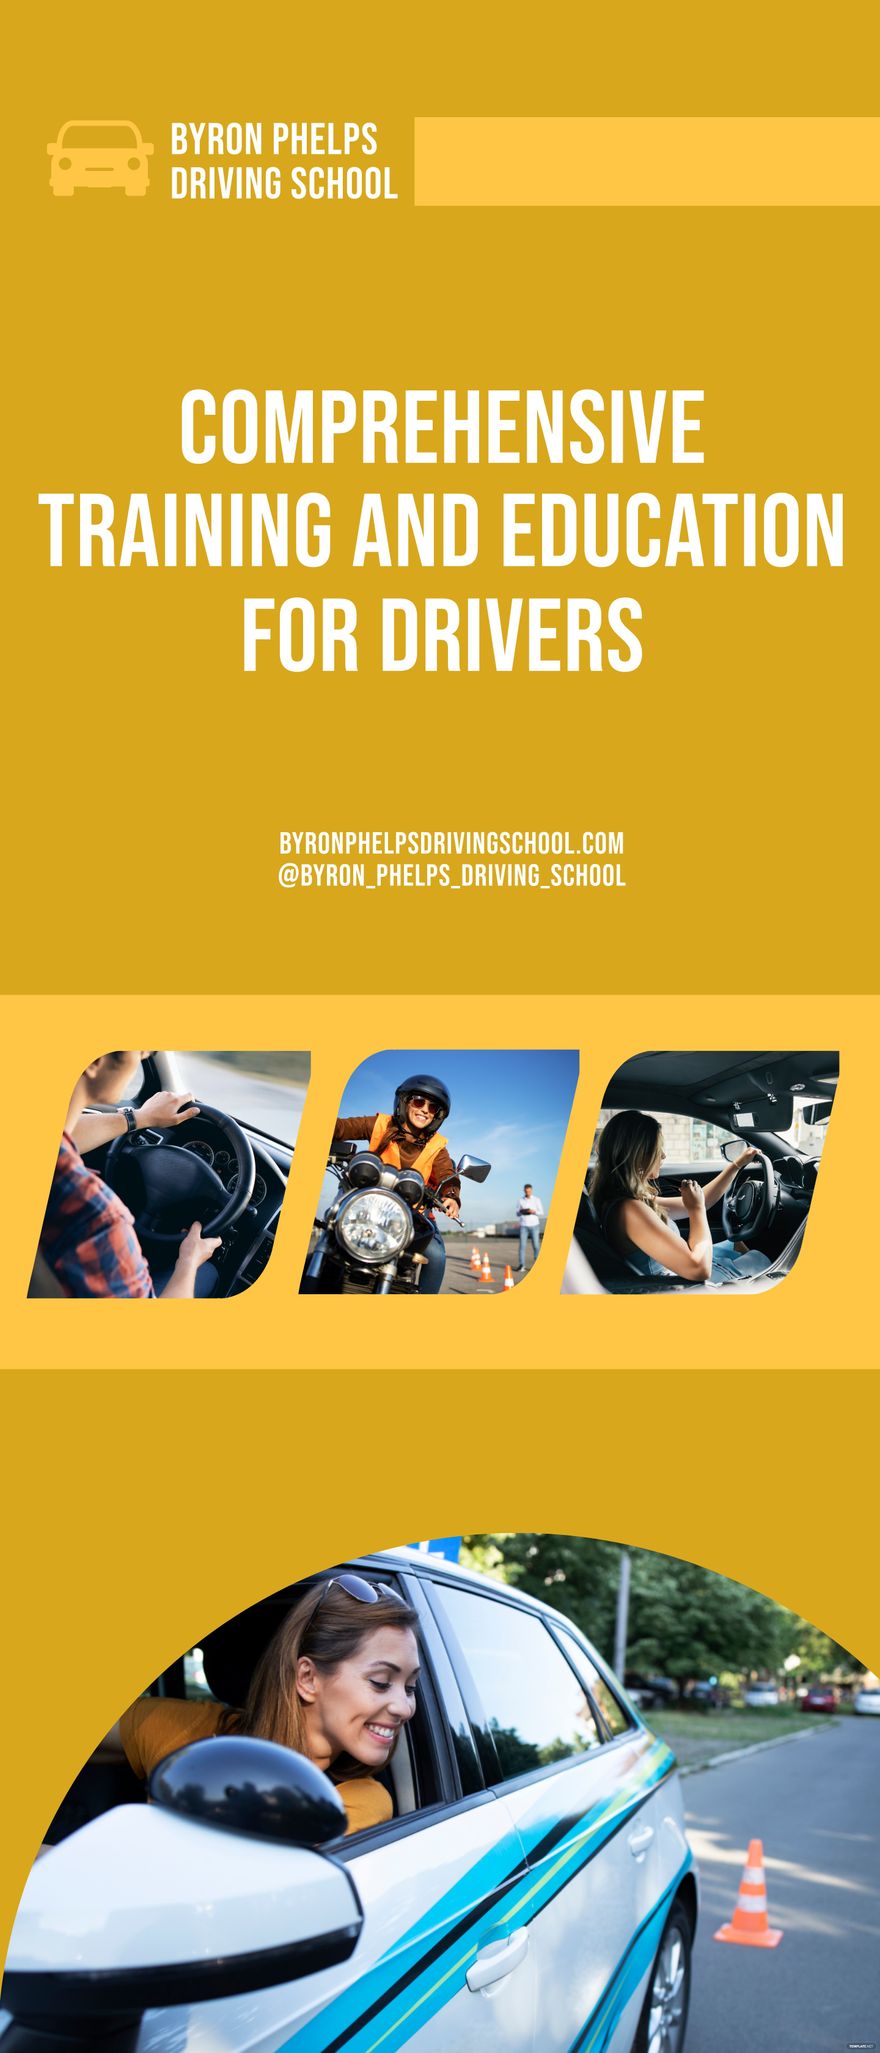 Driving School Roll Up Banner Template